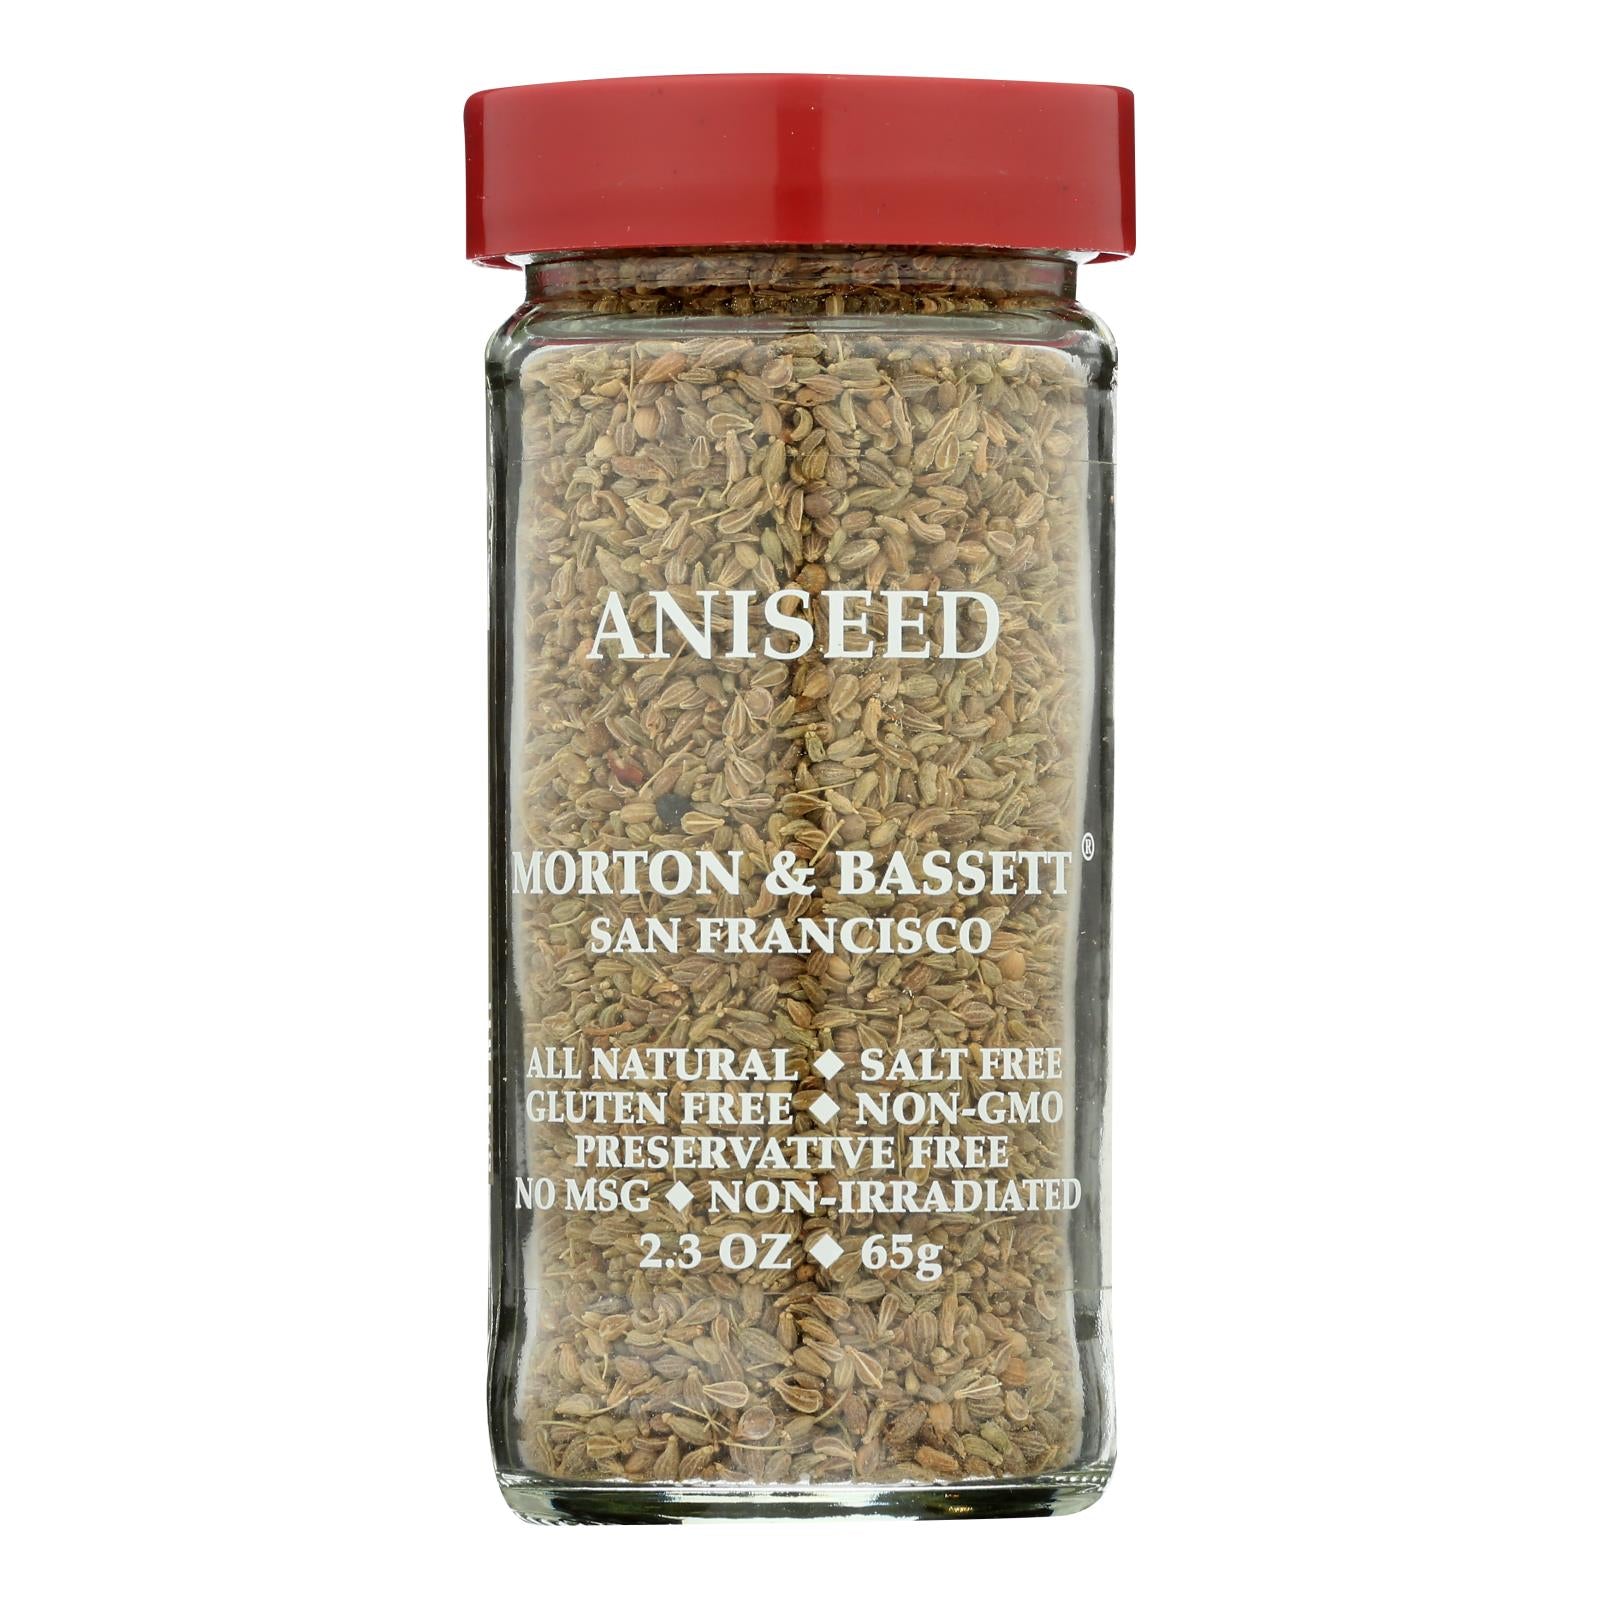 Morton And Bassett Seasoning - Aniseed - 2.3 Oz - Case Of 3 - Whole Green Foods